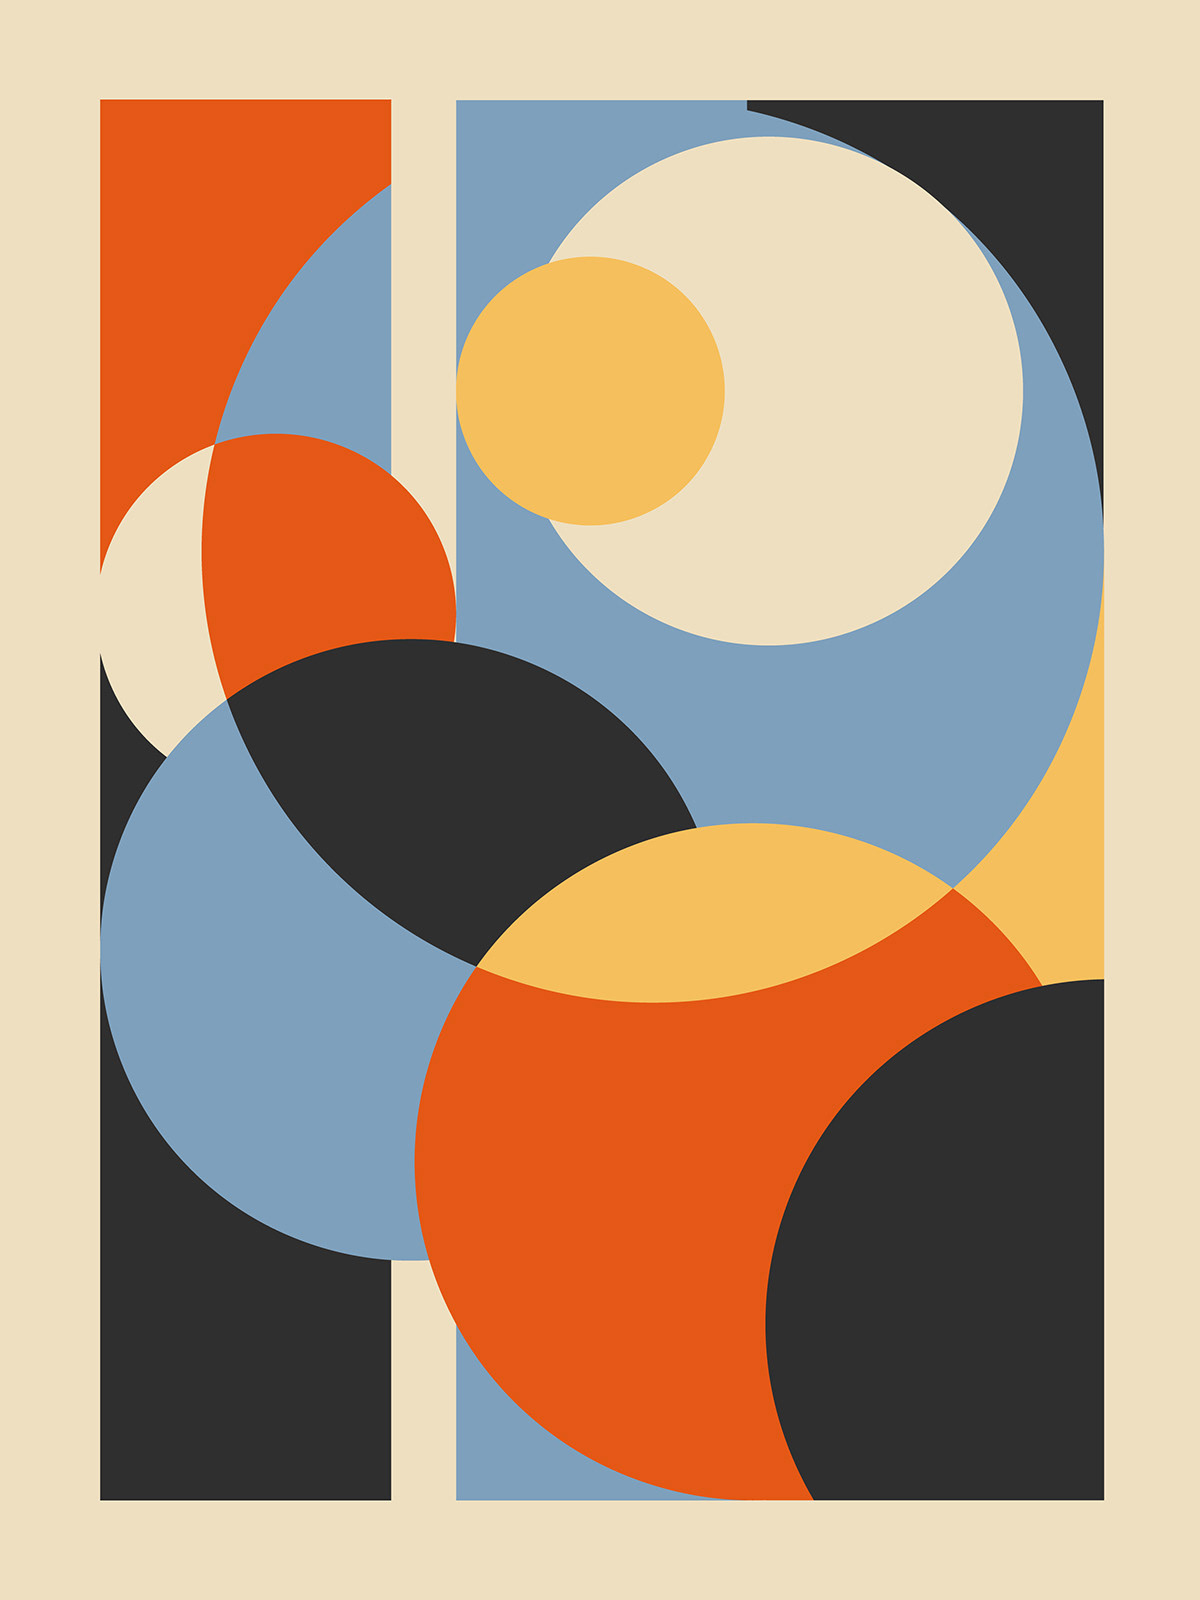 Planets illustration in Bauhaus style